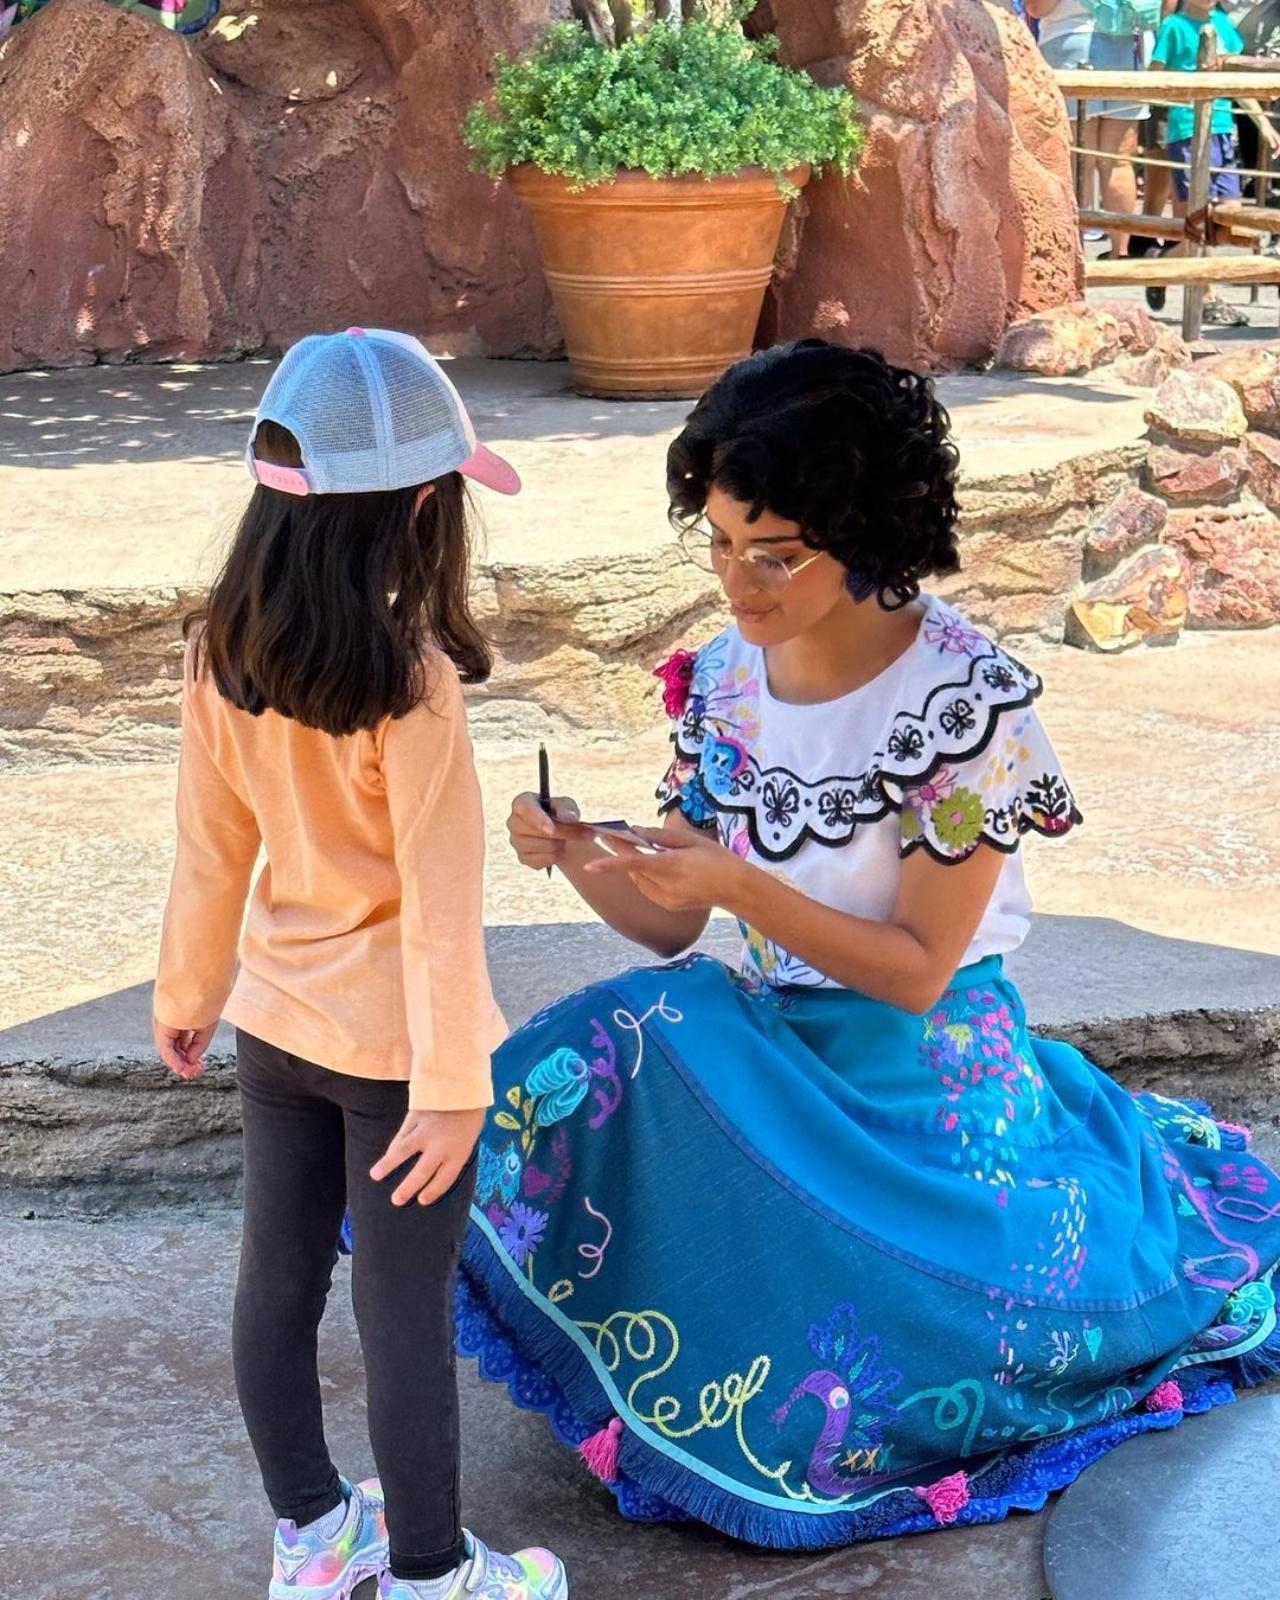 Two Disney characters in one frame - one princess granting another's wish on Disneyland streets